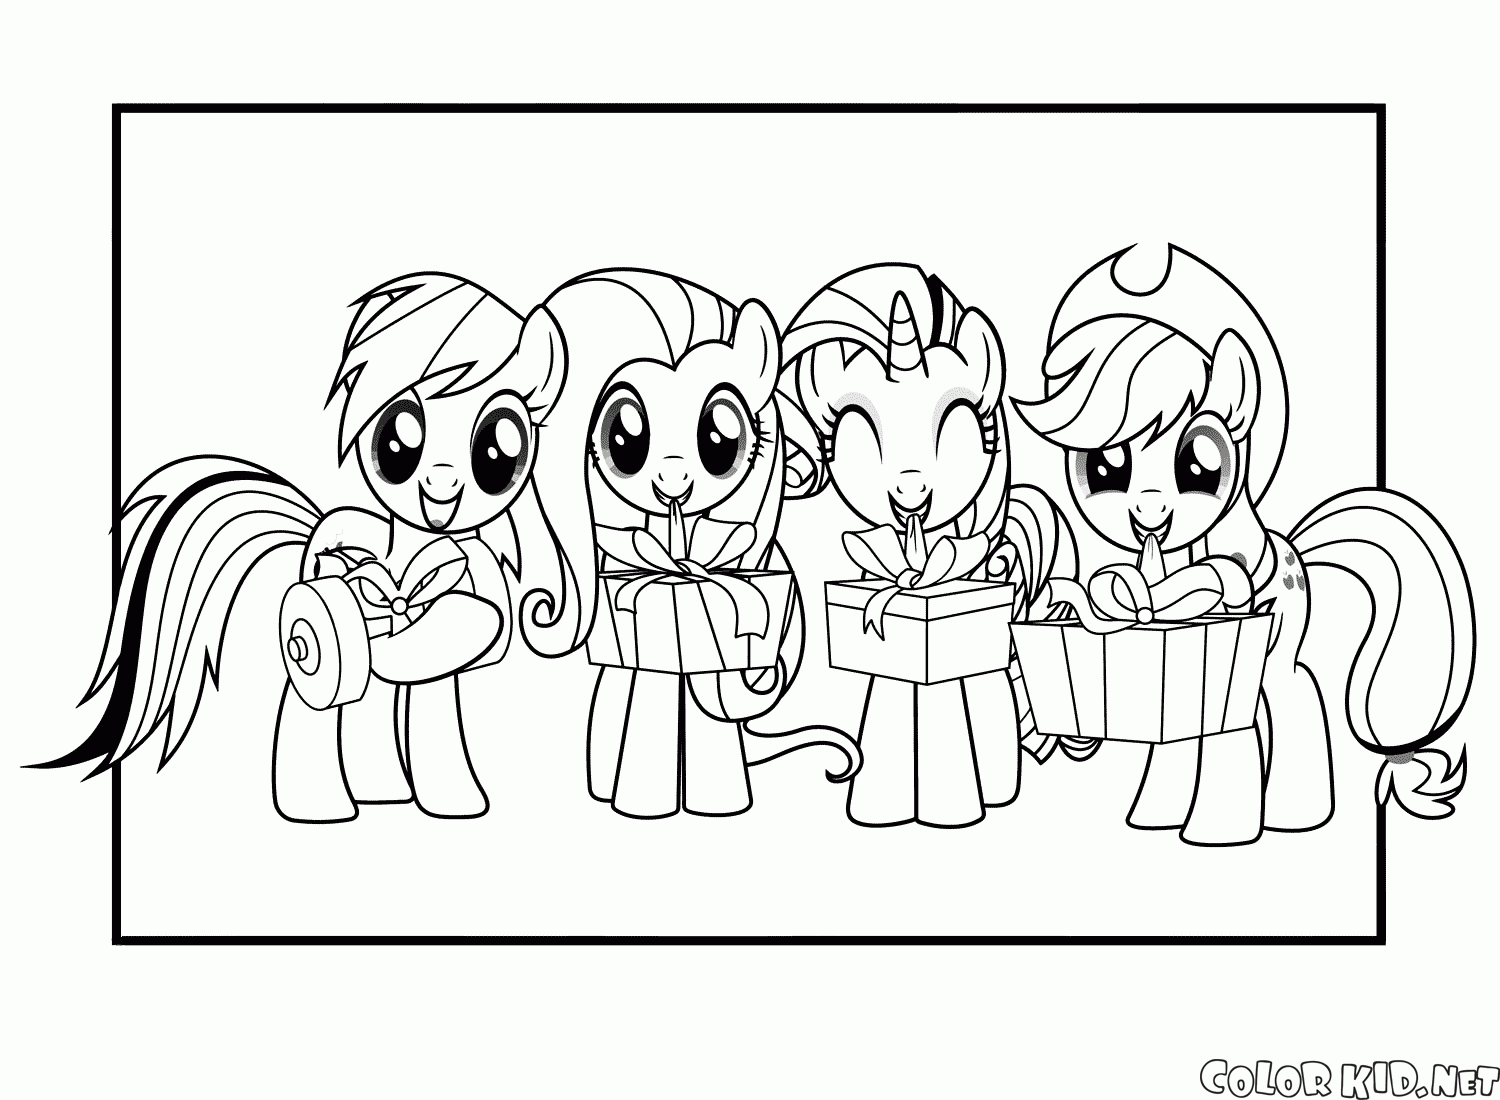 Gifts for ponies